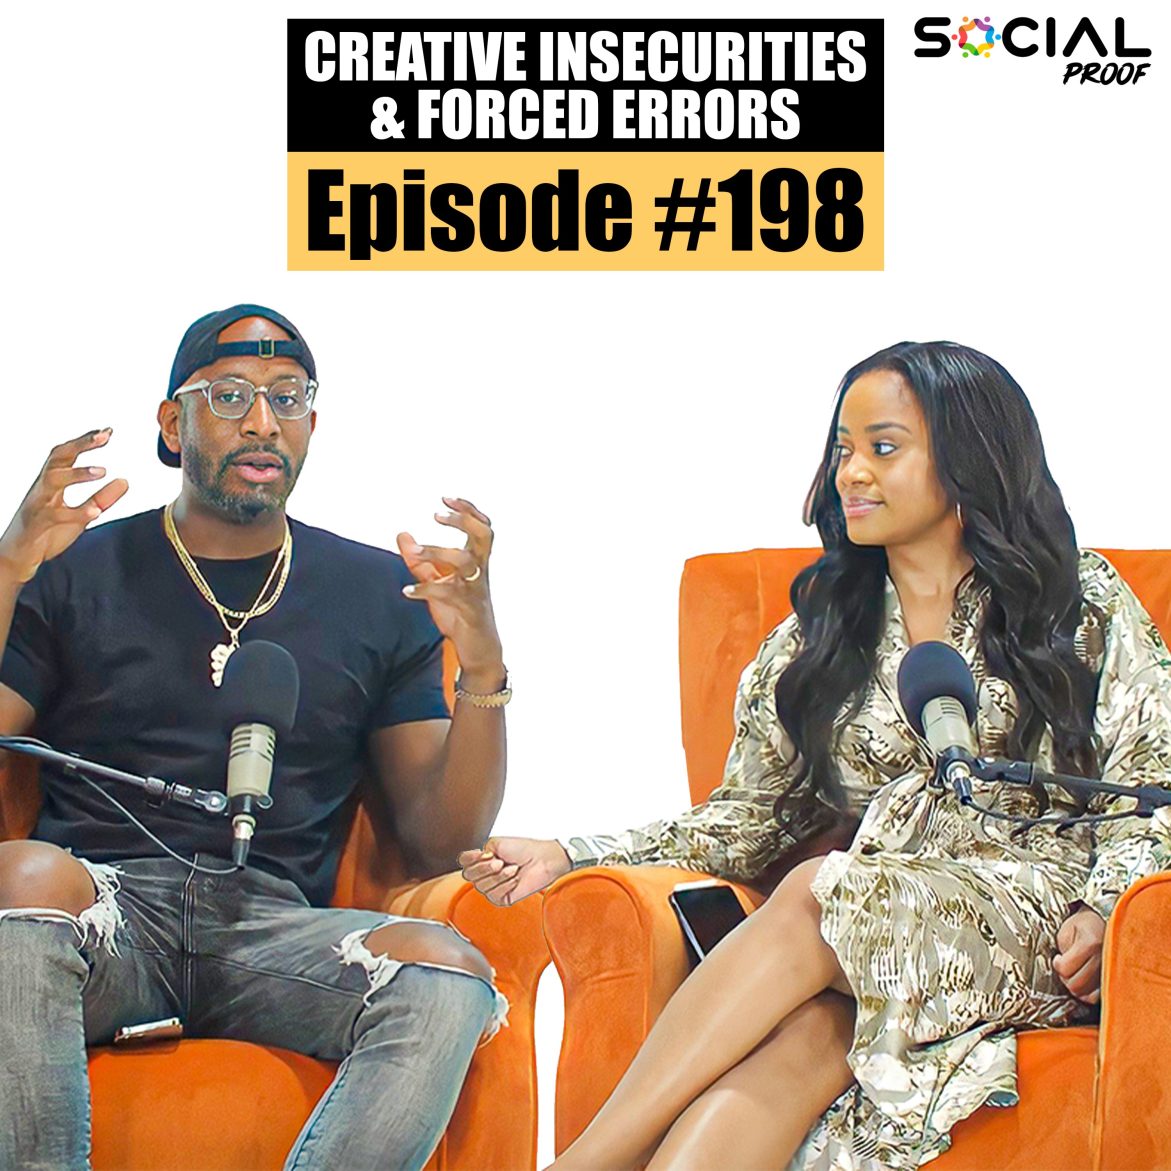 Black Podcasting - Creative Insecurities & Forced Errors - Episode #198 w/ David & Donni